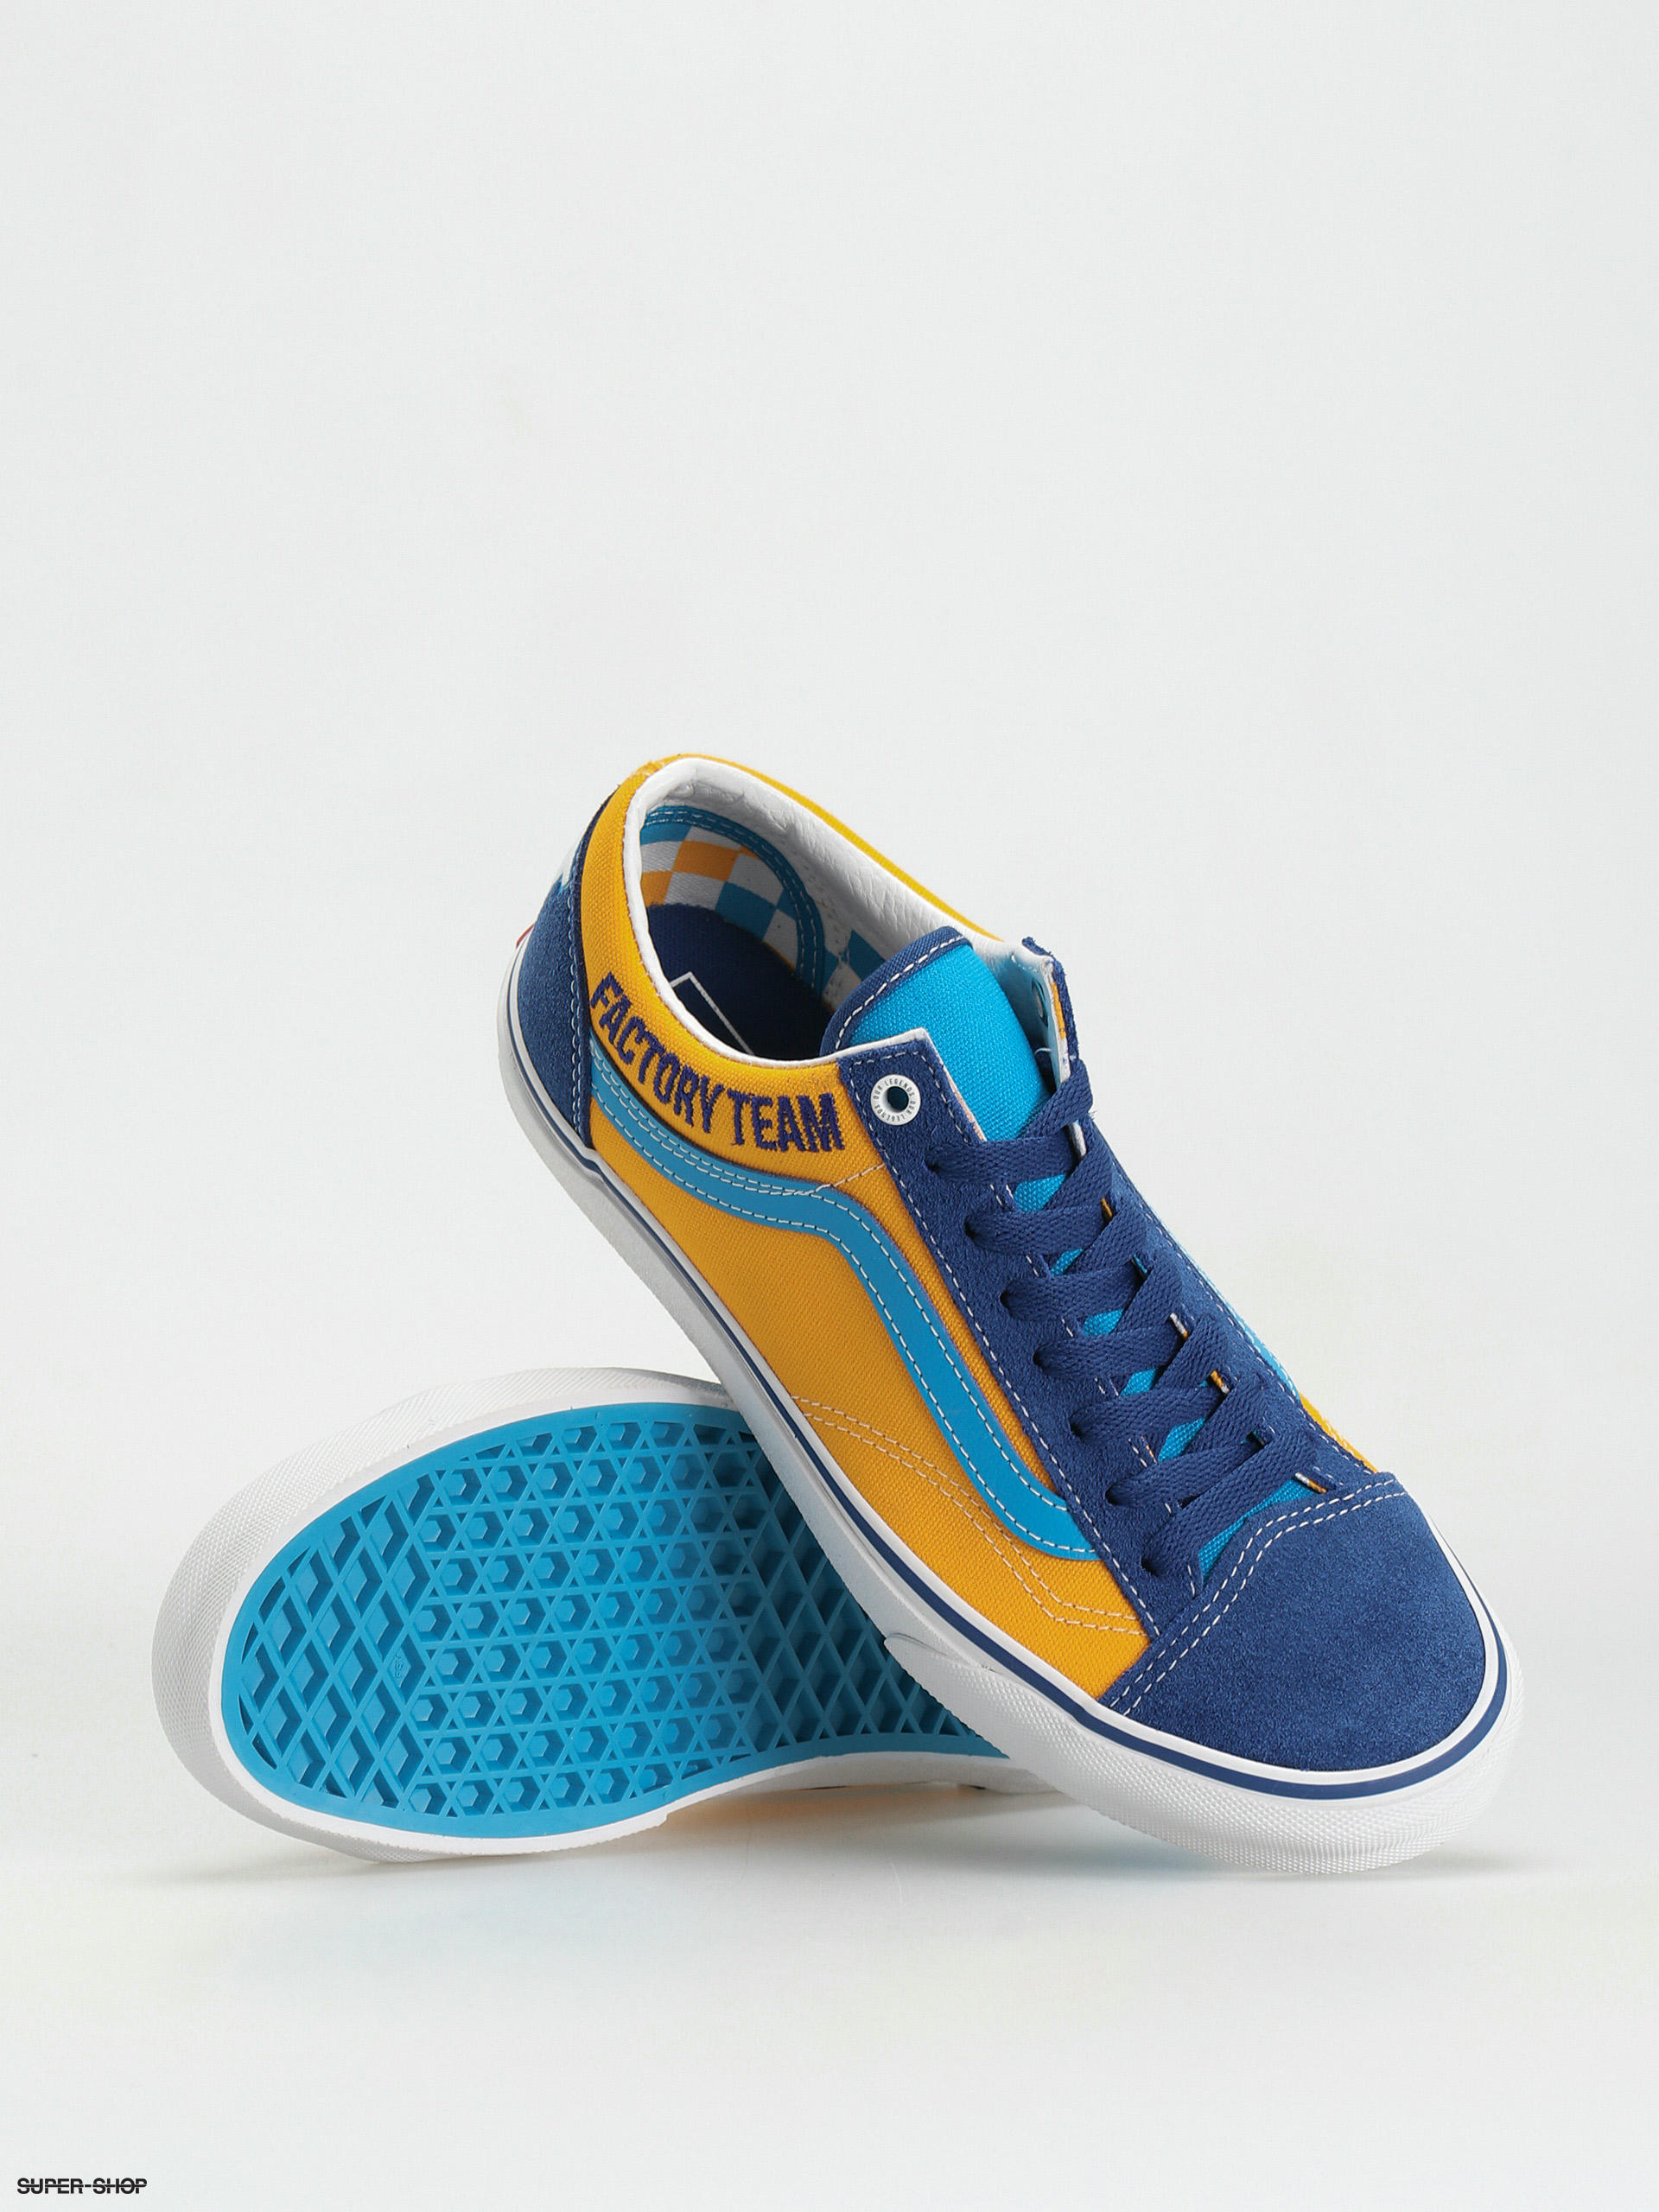 Vans Style (our legends gt/dyno blue/yellow)